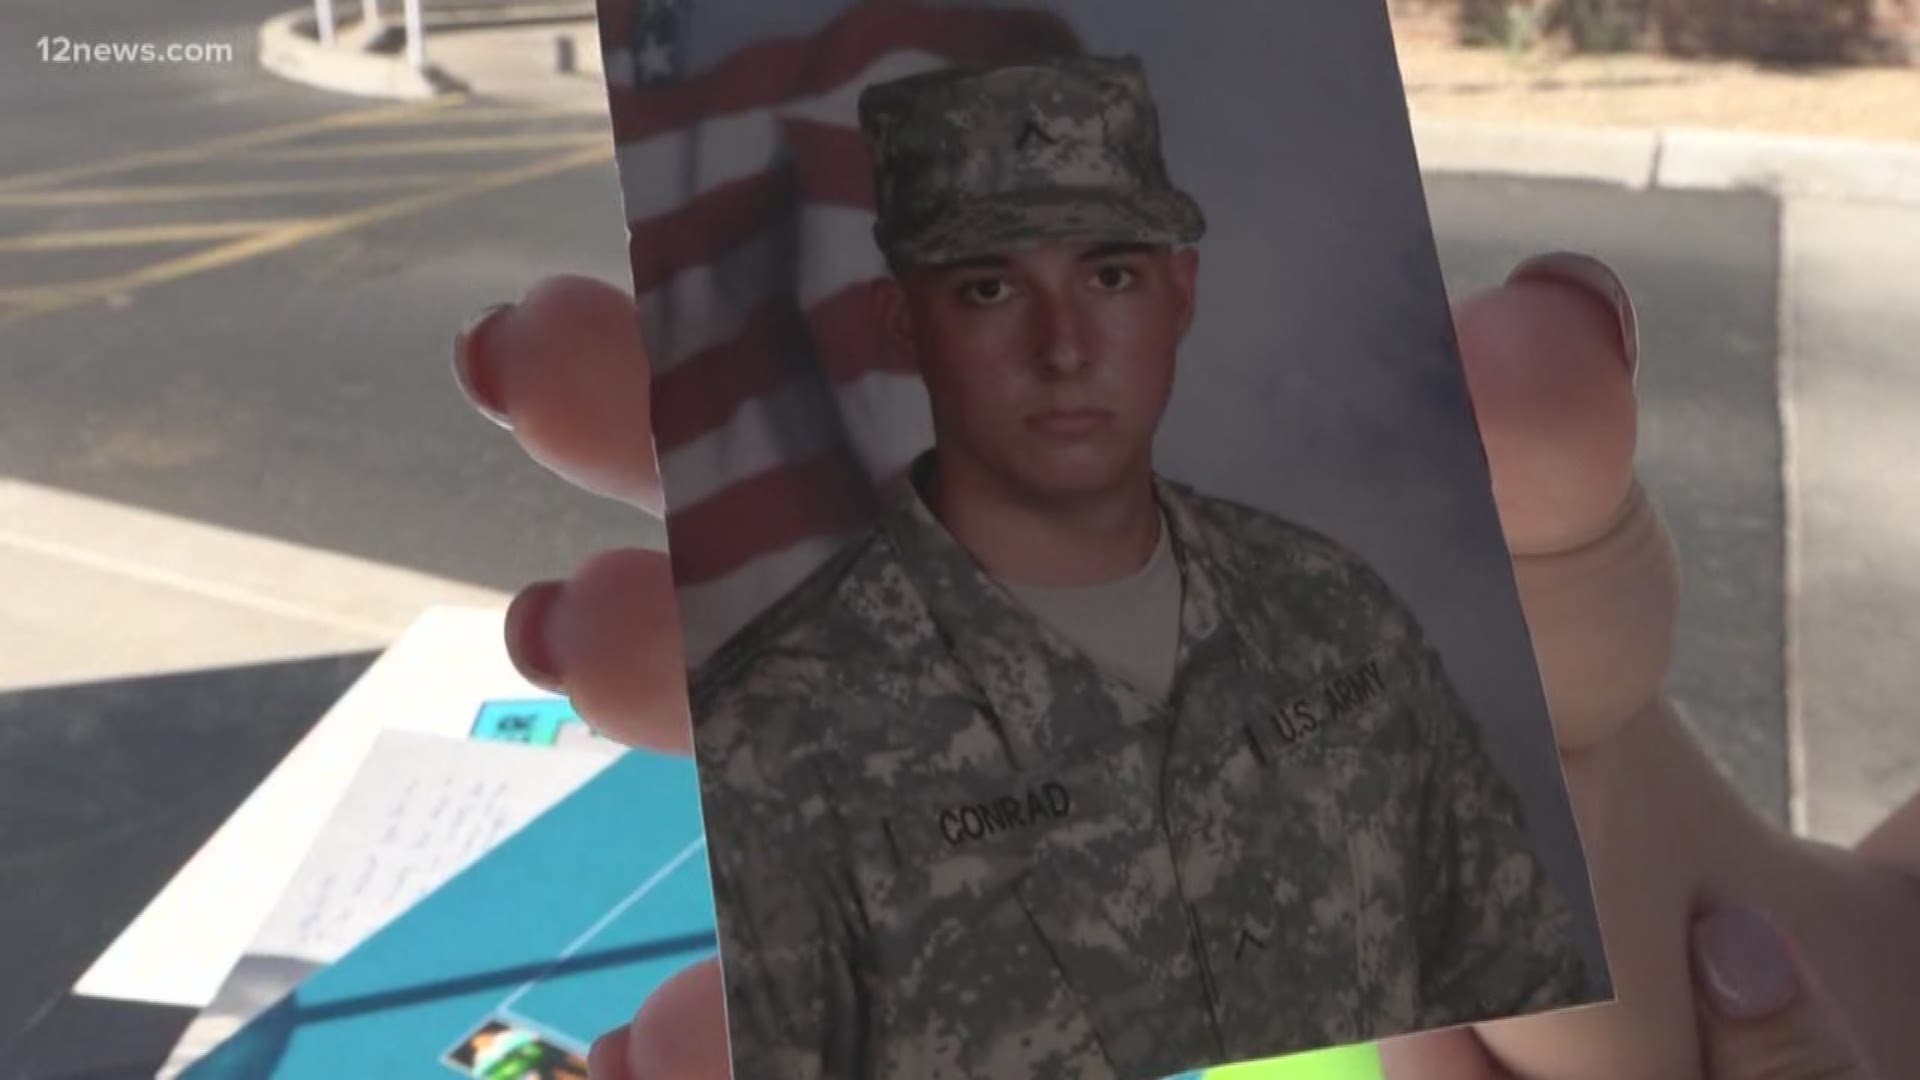 A soldier from Chandler died in the line of duty after enemies shot him in Somalia.